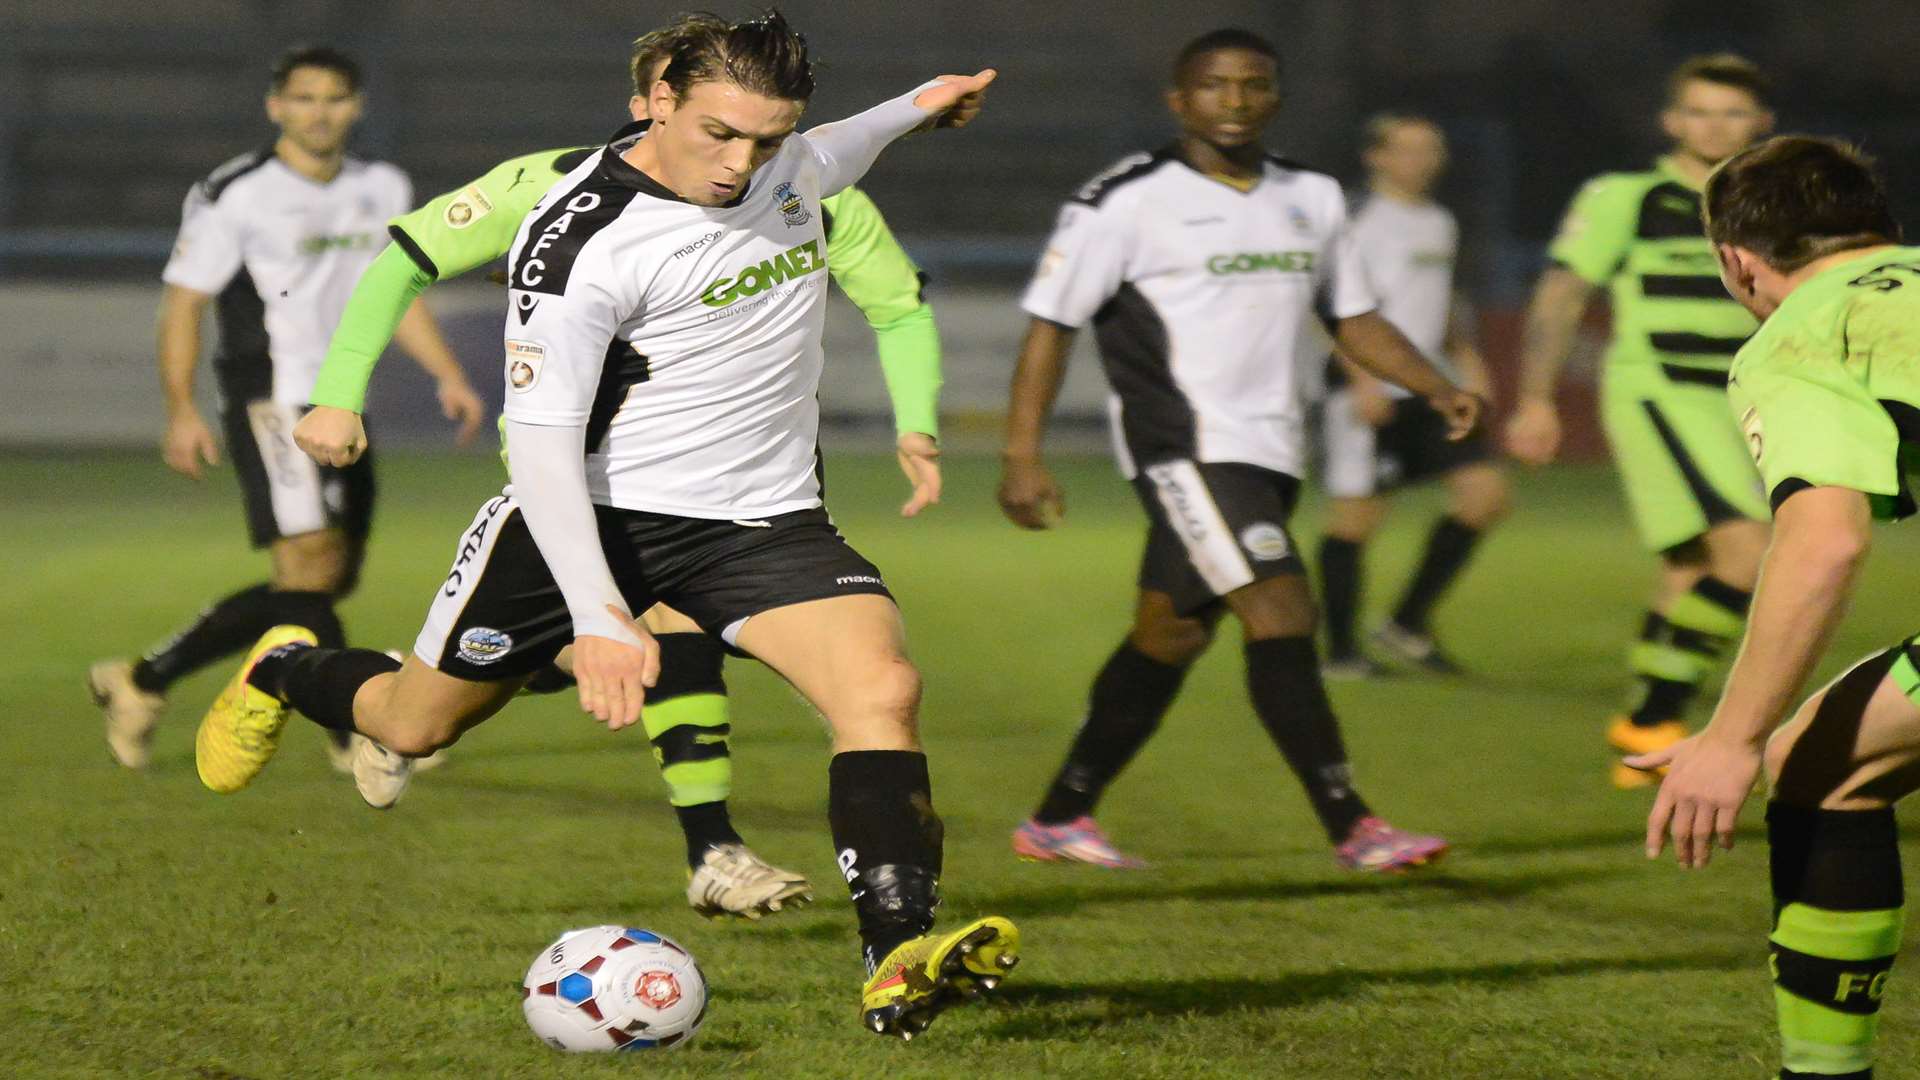 Liam Bellamy in action for Dover in the Vanarama Conference clash with Forest Green Rovers earlier this season